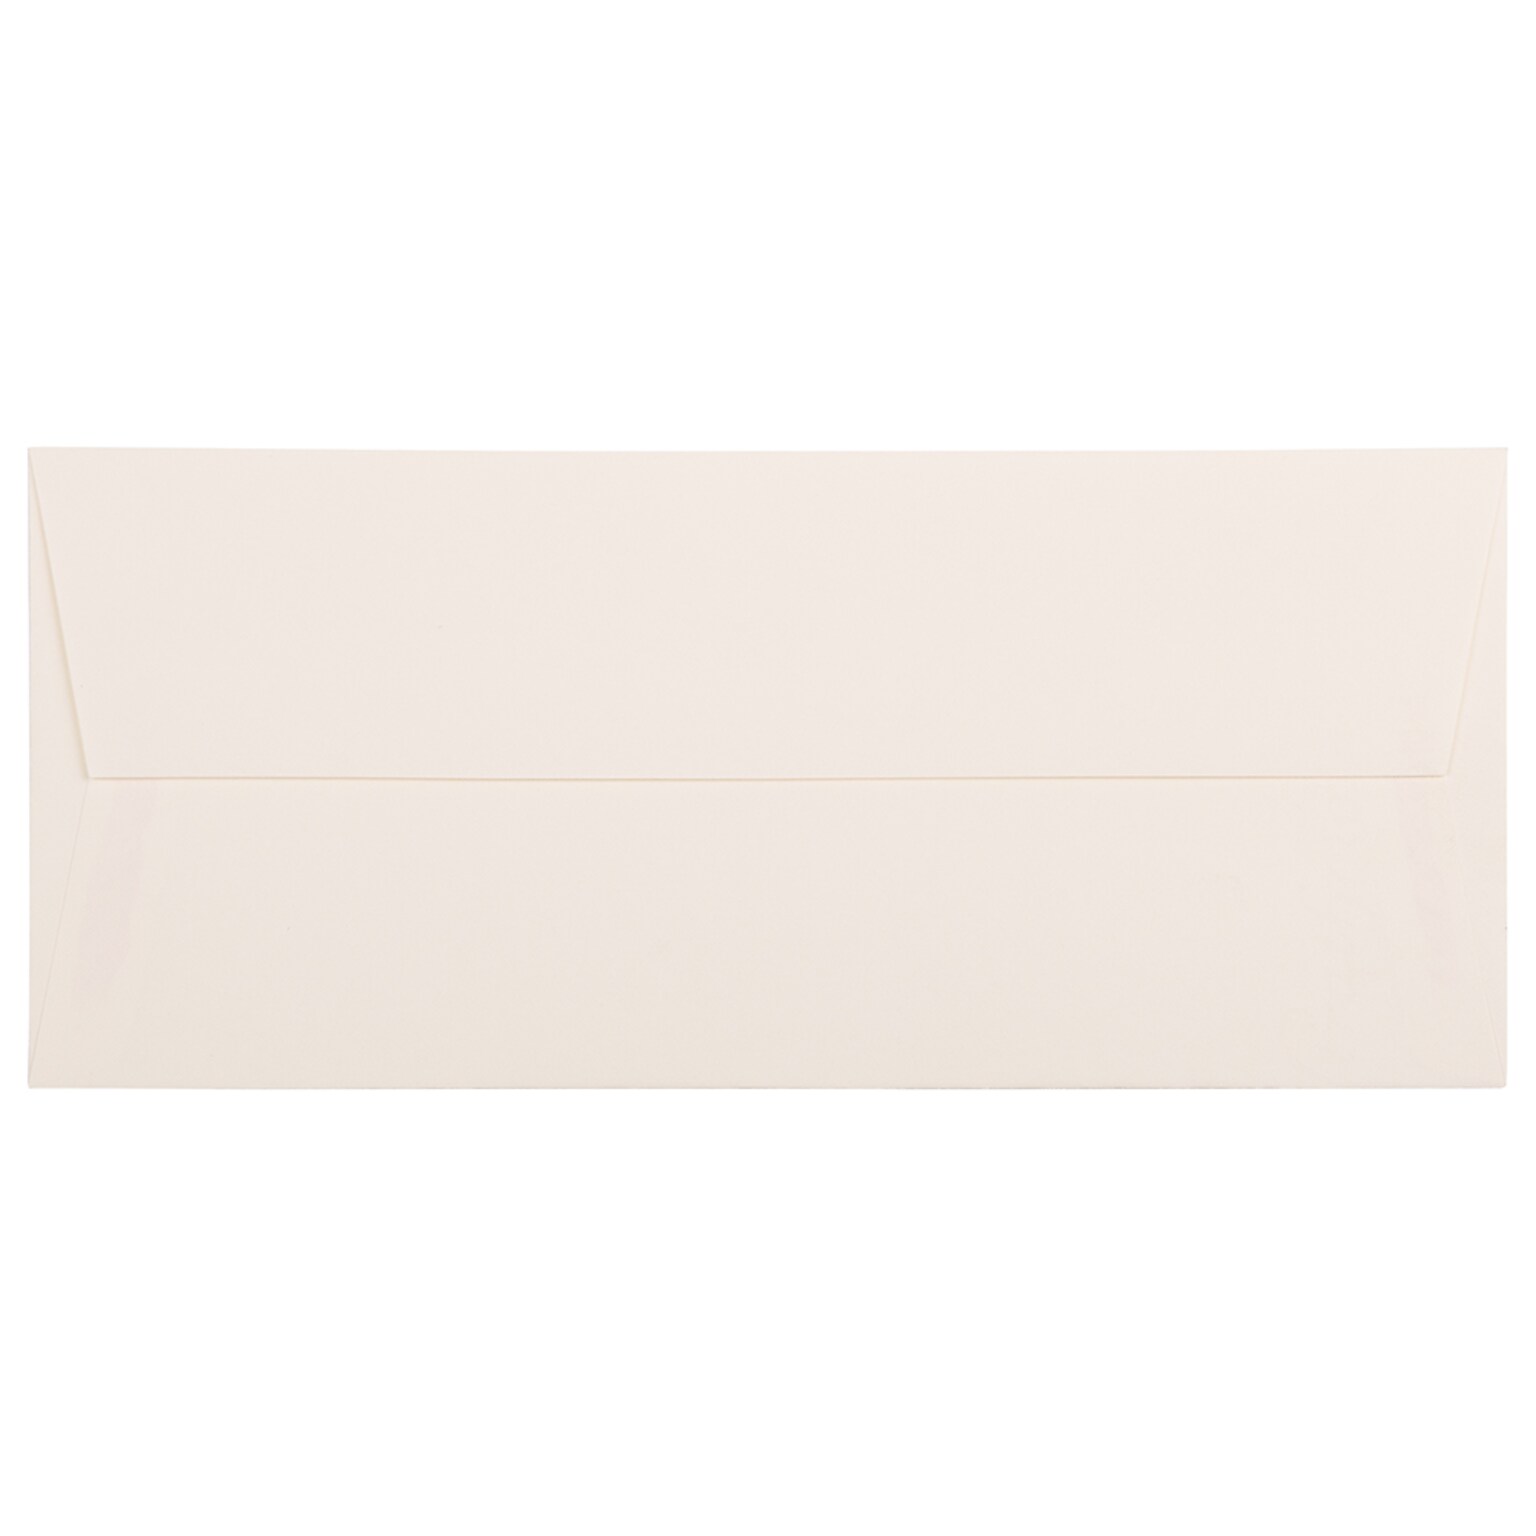 JAM Paper Strathmore Open End #10 Business Envelope, 4 1/8 x 9 1/2, Natural White Wove, 500/Pack (34992H)